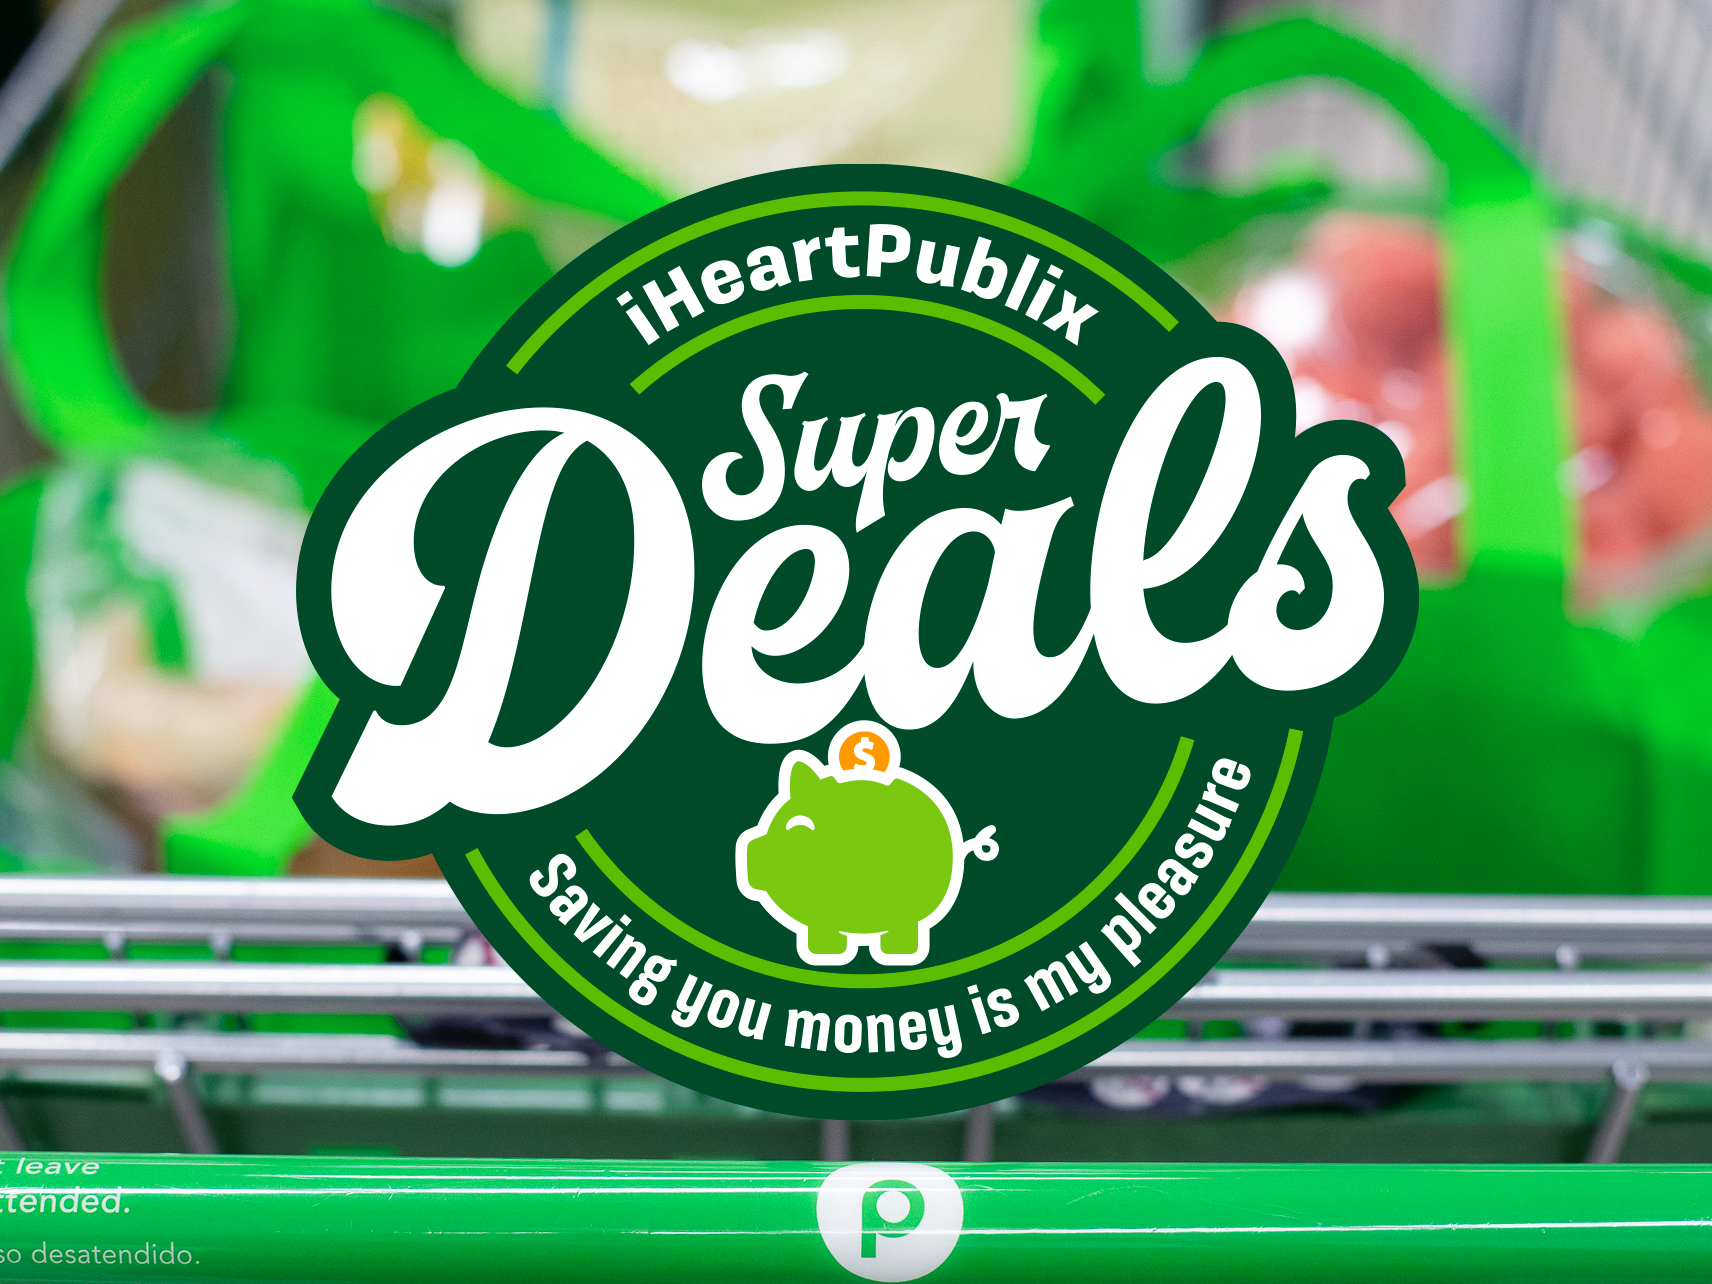 Publix Super Deals Week Of 6/30 to 7/6 (6/29 to 7/5 For Some)